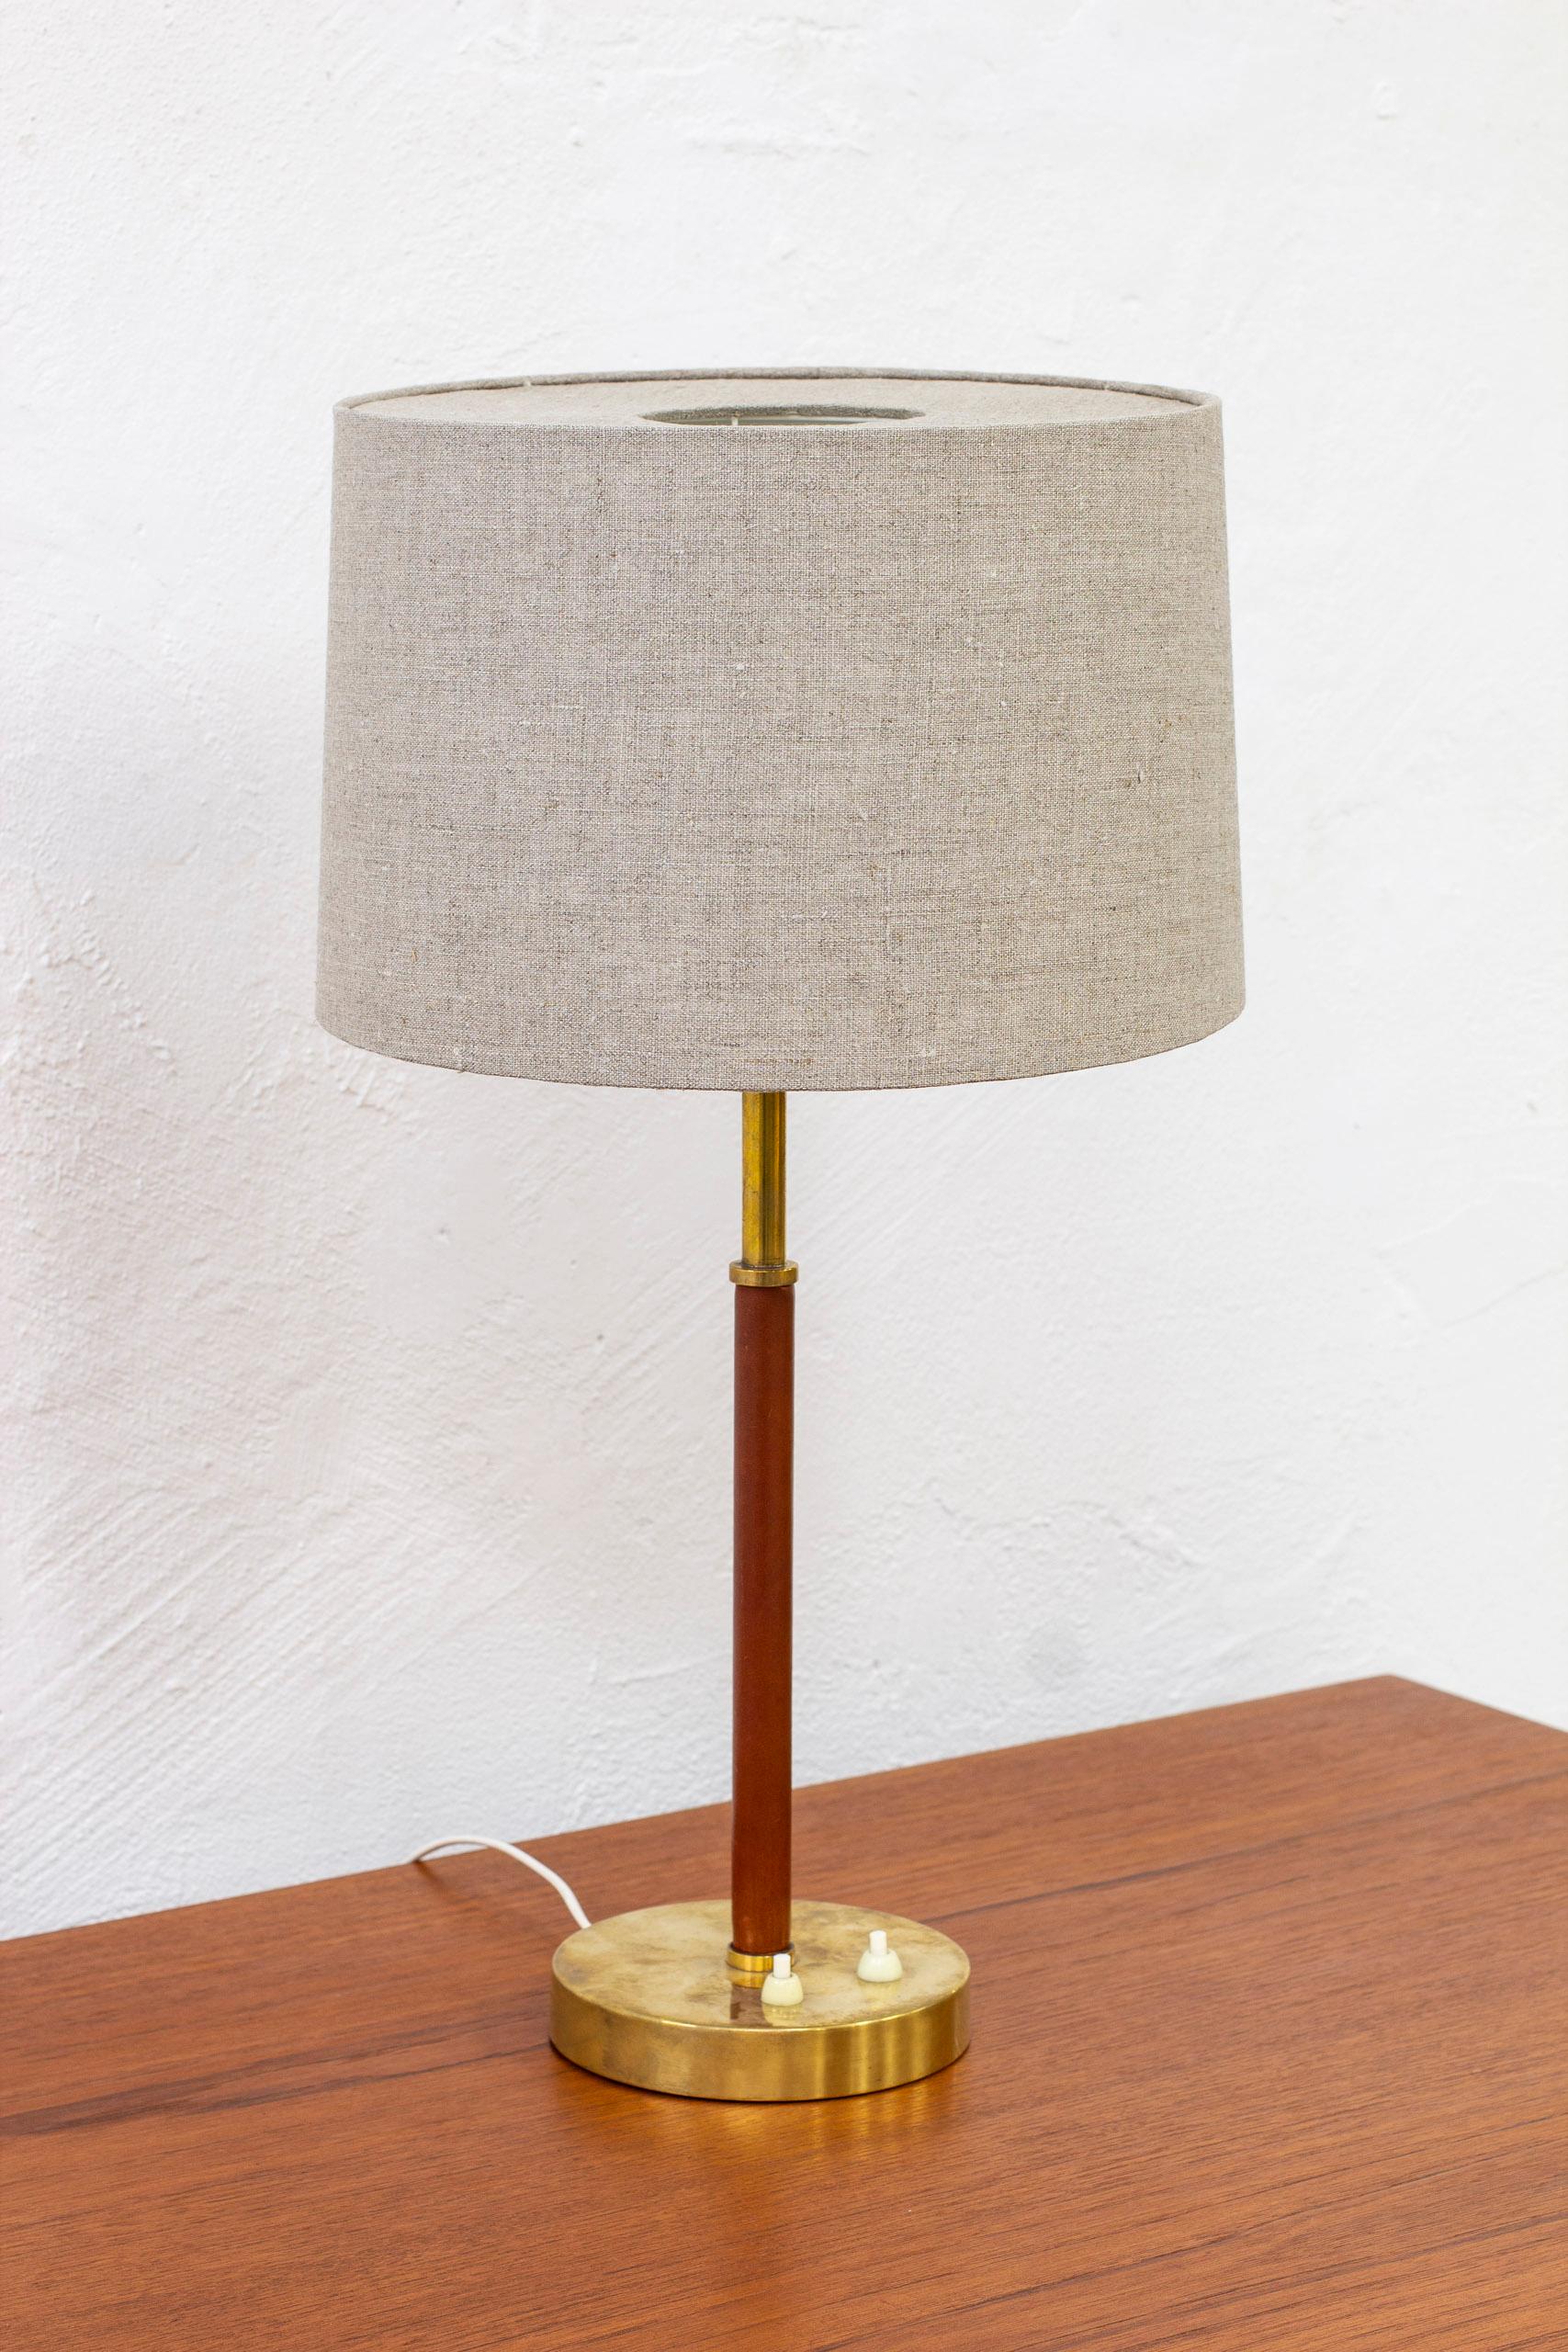 Table lamp model 2043 designed by Bertil Brisborg & Åke Hultgren. Produced in Sweden by Nordiska Kompaniet during the 1950s. Made from brass, white lacquered metal and cognac colored leather. The original lamp shade have been reupholstered in